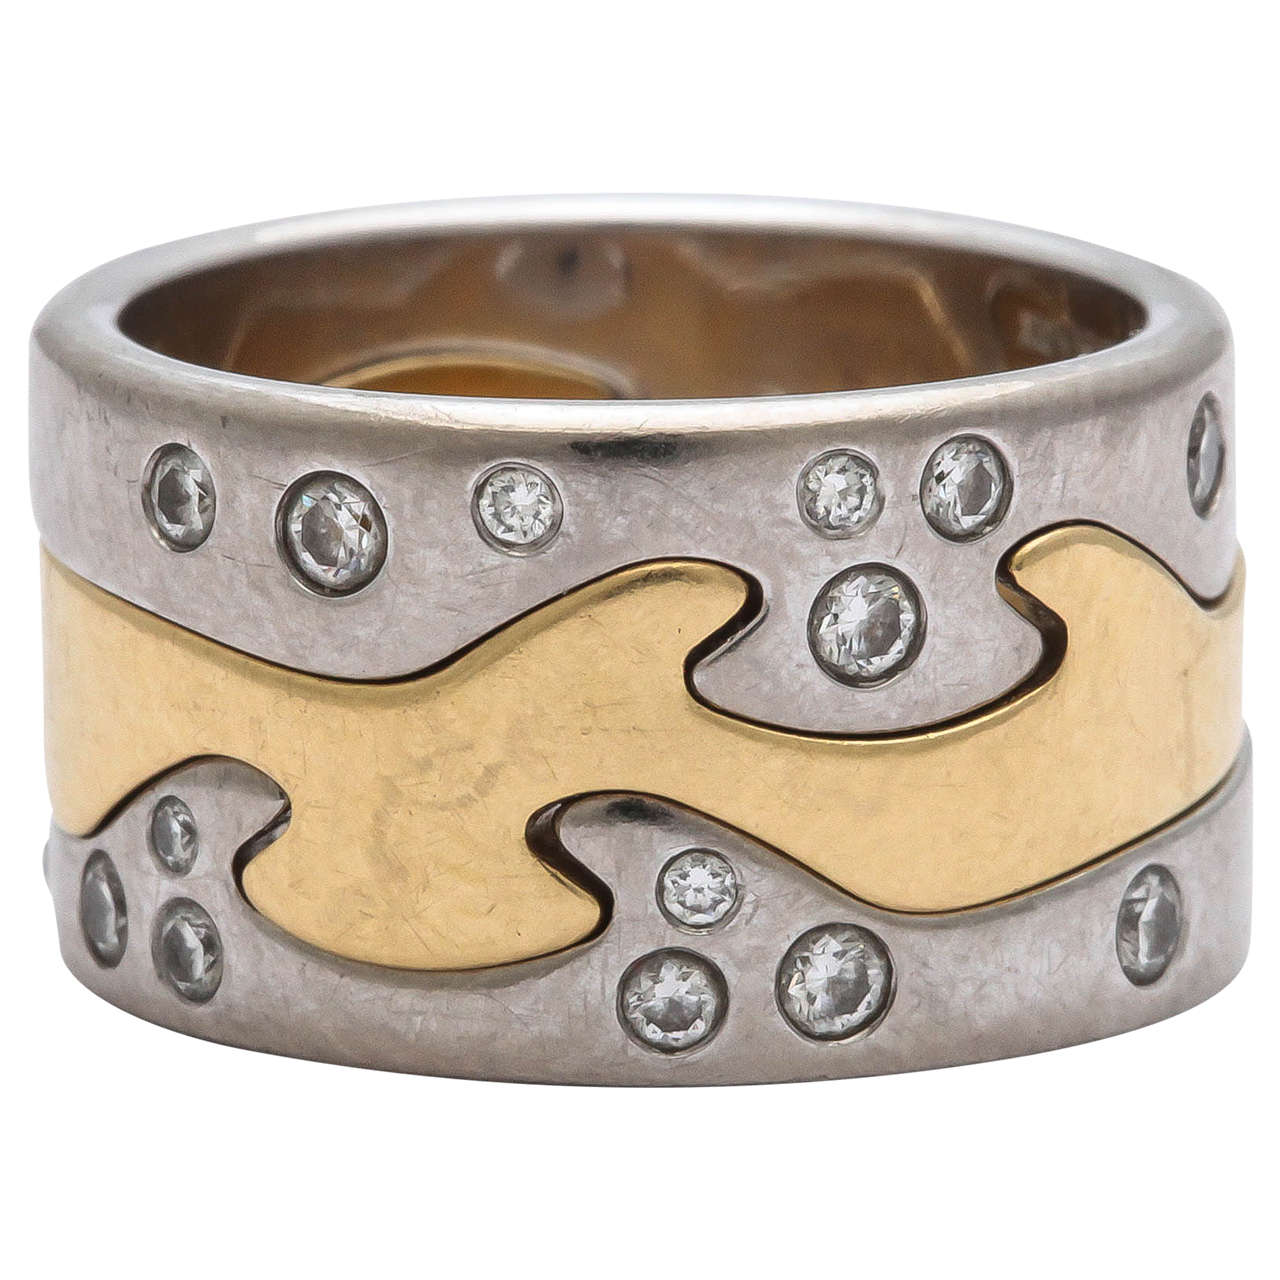 Georg Jensen Fusion Ring - 4 For Sale on 1stDibs | georg jensen puzzle ring,  georg jenson fusion ring, georg jensen fusion rings sale